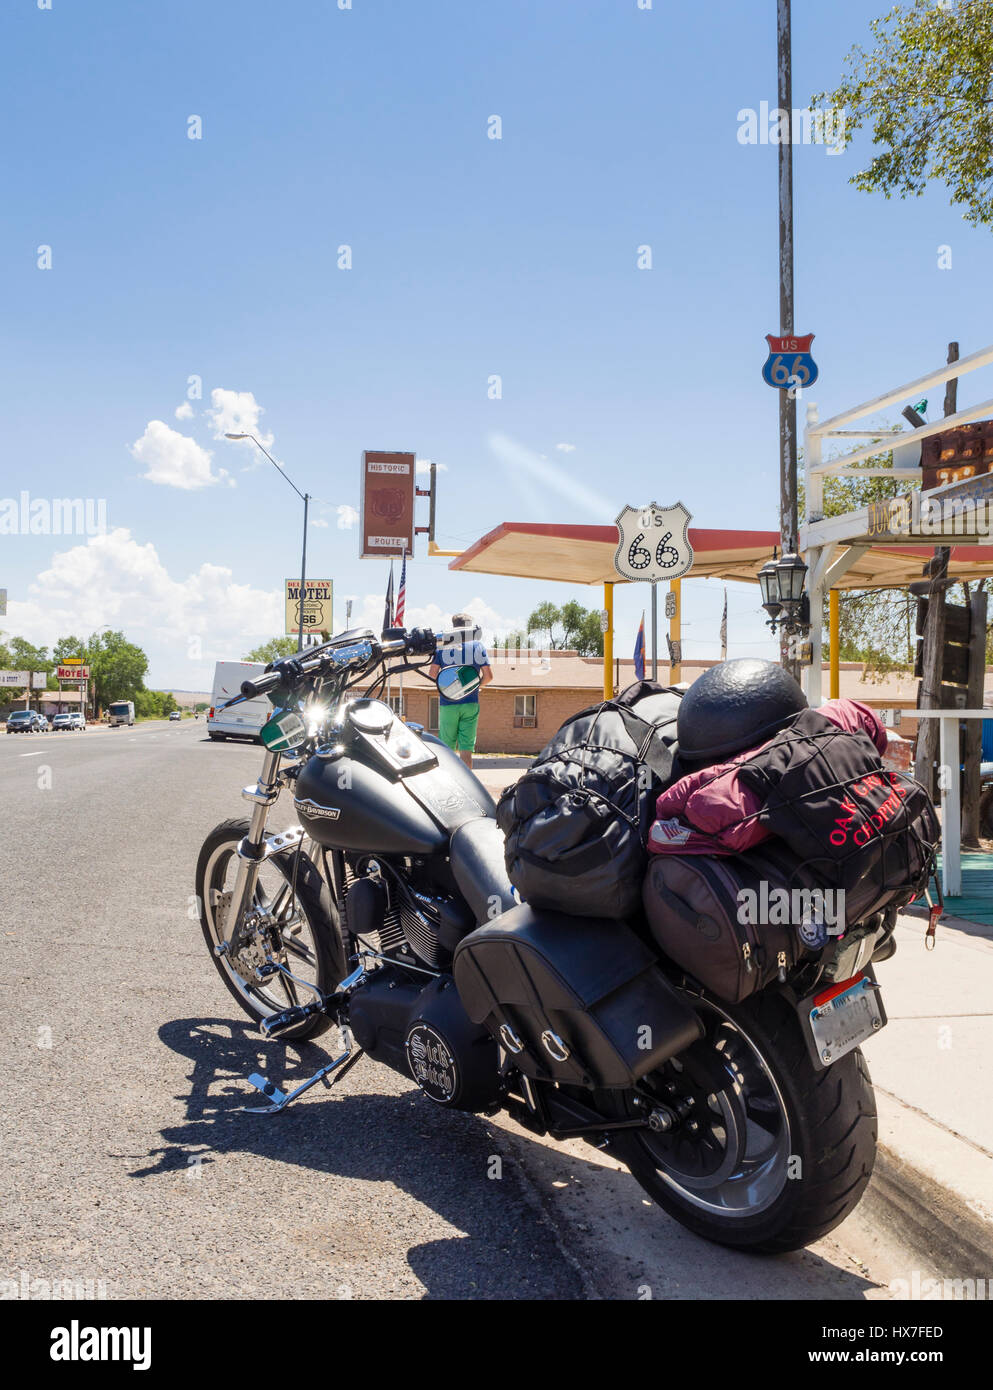 Seligman, AZ - 27 July 2016: A loaded motorcycle parked outside a gas station in Seligman (AZ) at the historic Route 66. Stock Photo